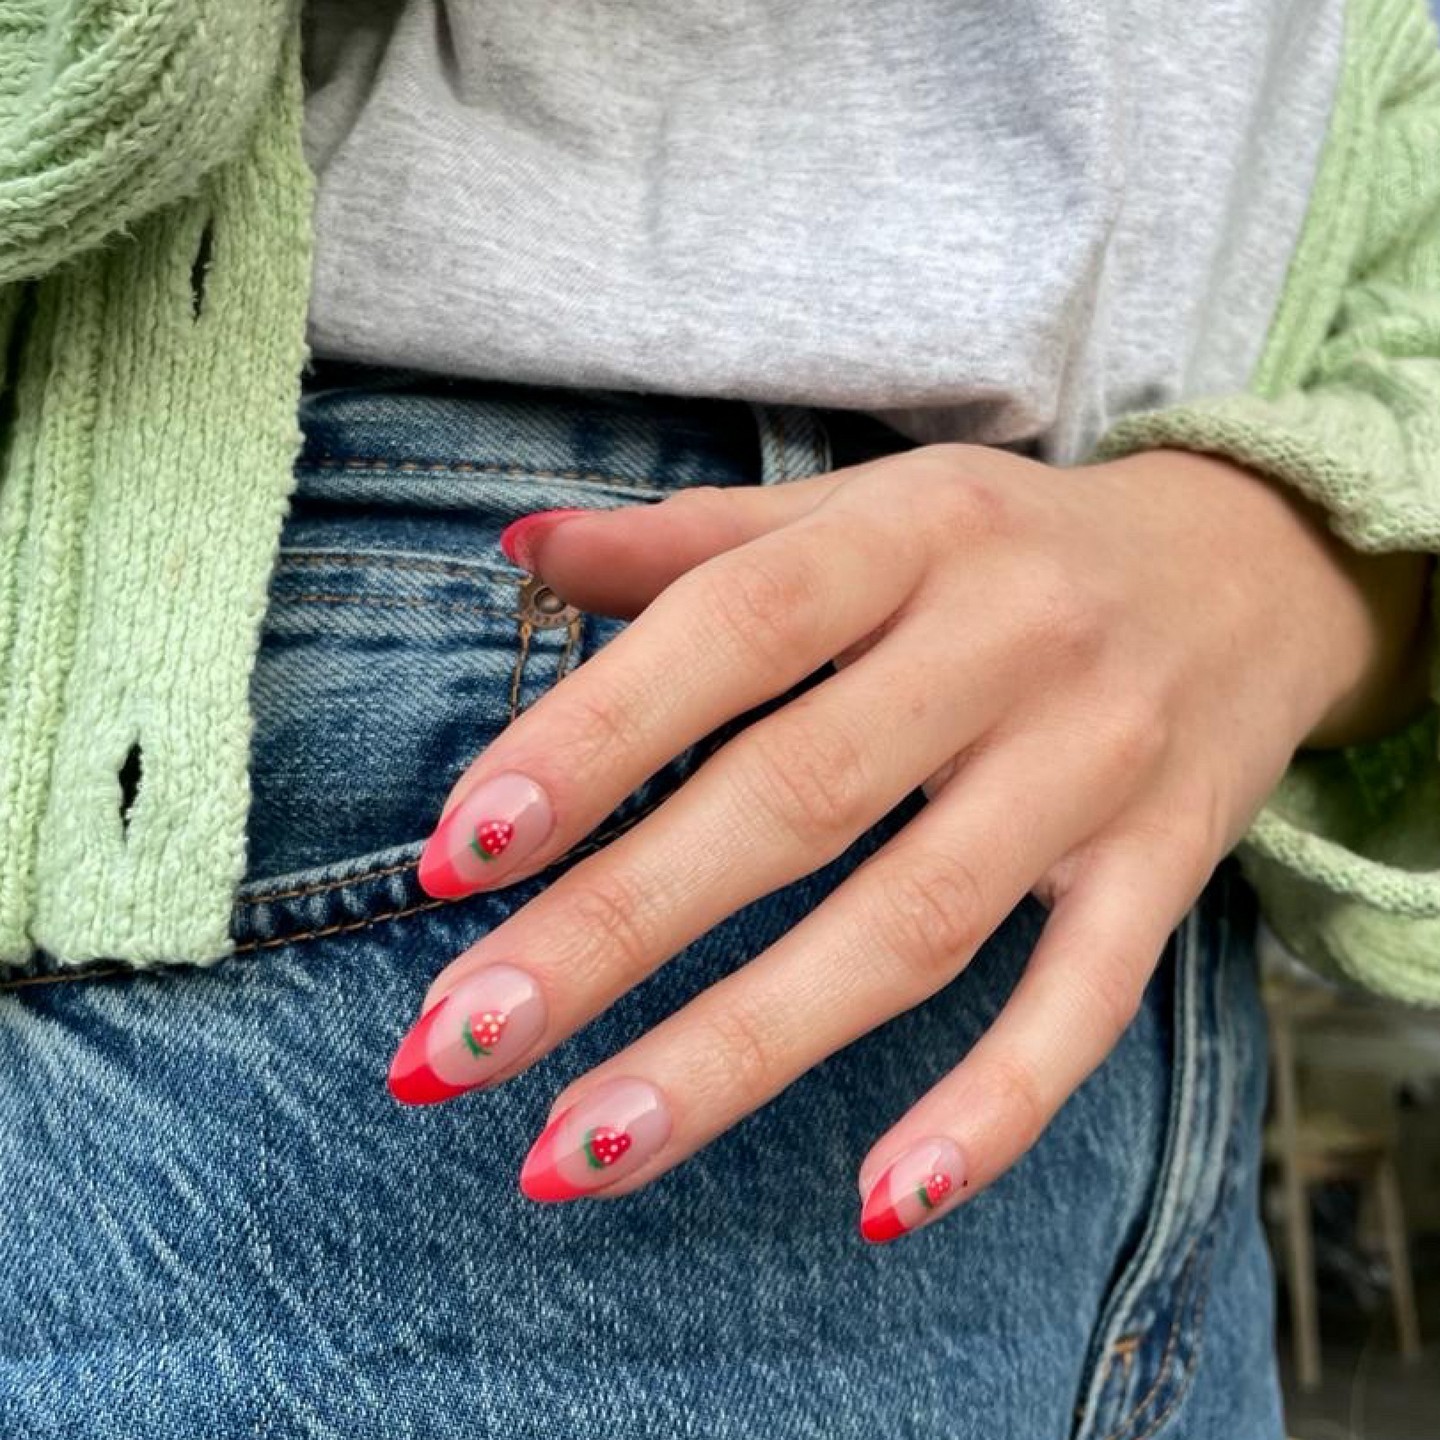 7 Foods for Stronger Nails to Add to Your Diet | TheThirty